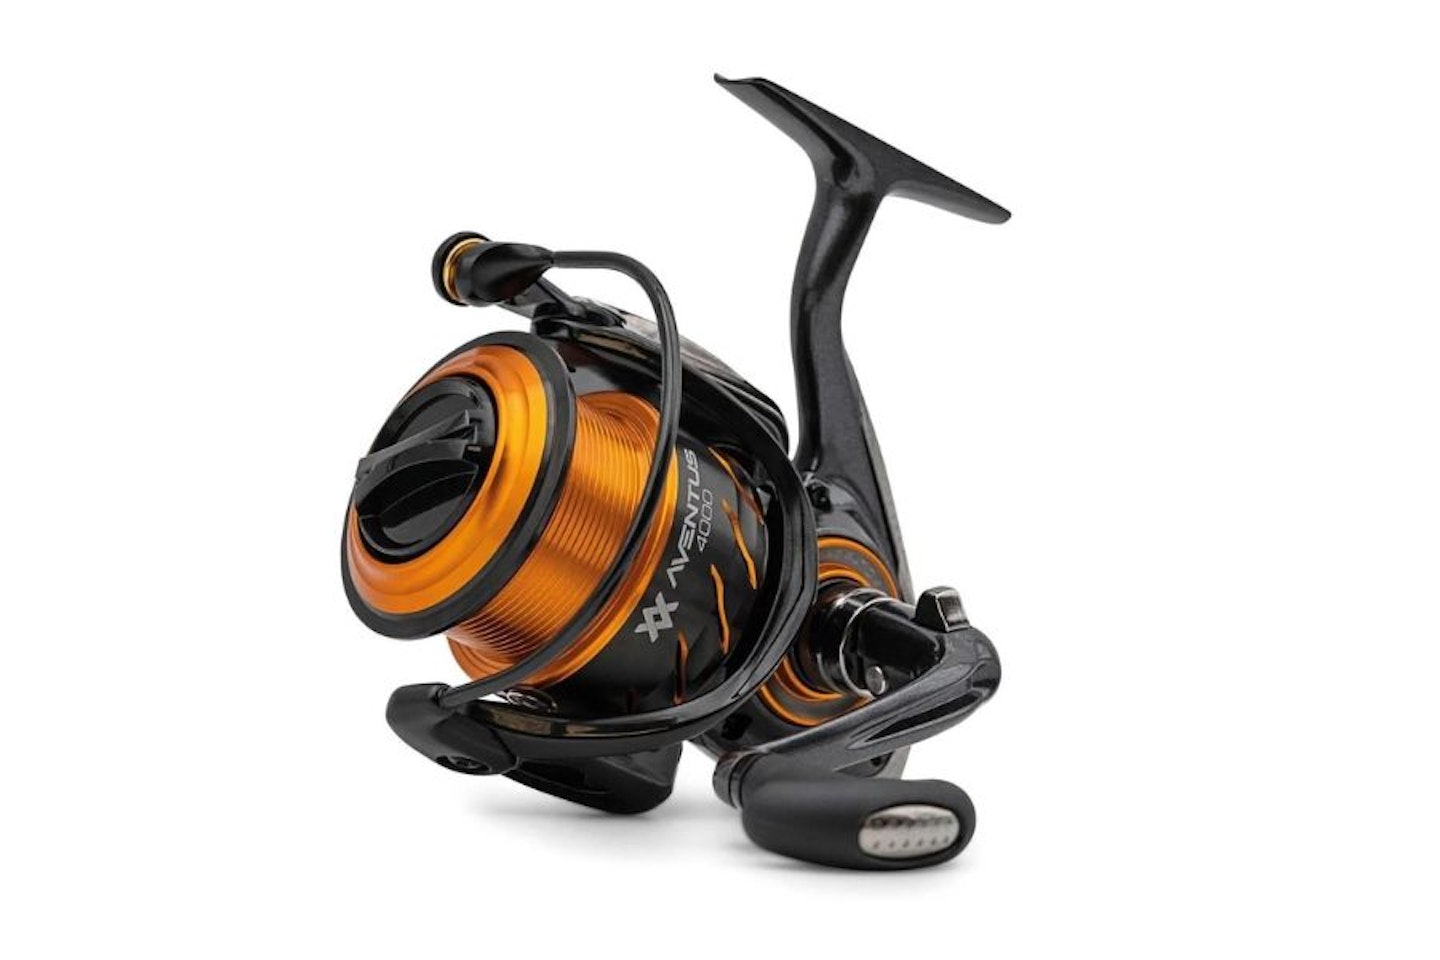 An Introduction to how, why, and when to use Big Pit Reels